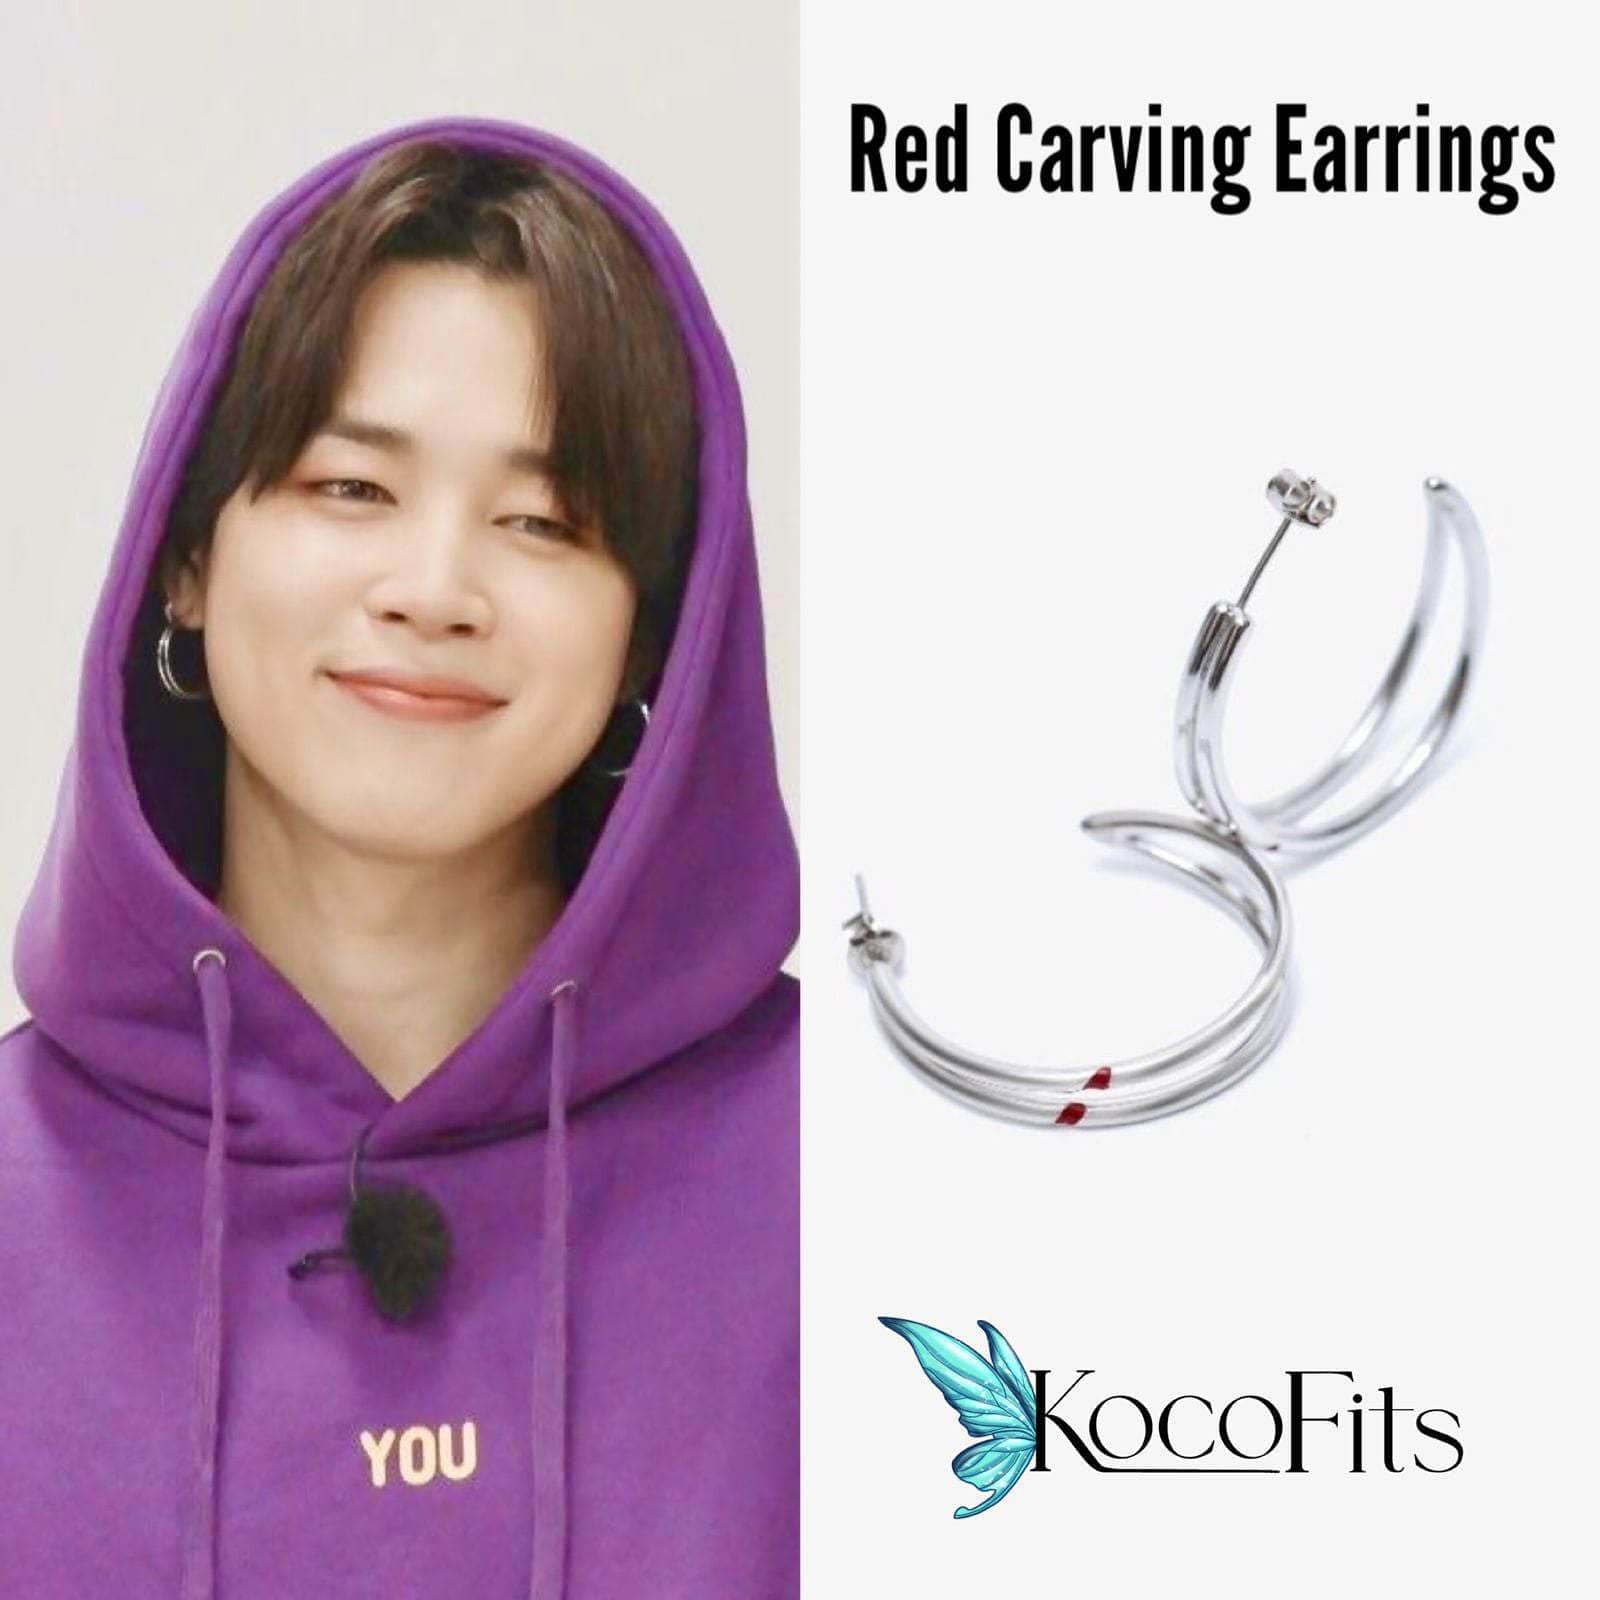 BTS JIMIN RED CARVING EARRING ジミン ピアス - ピアス(両耳用)